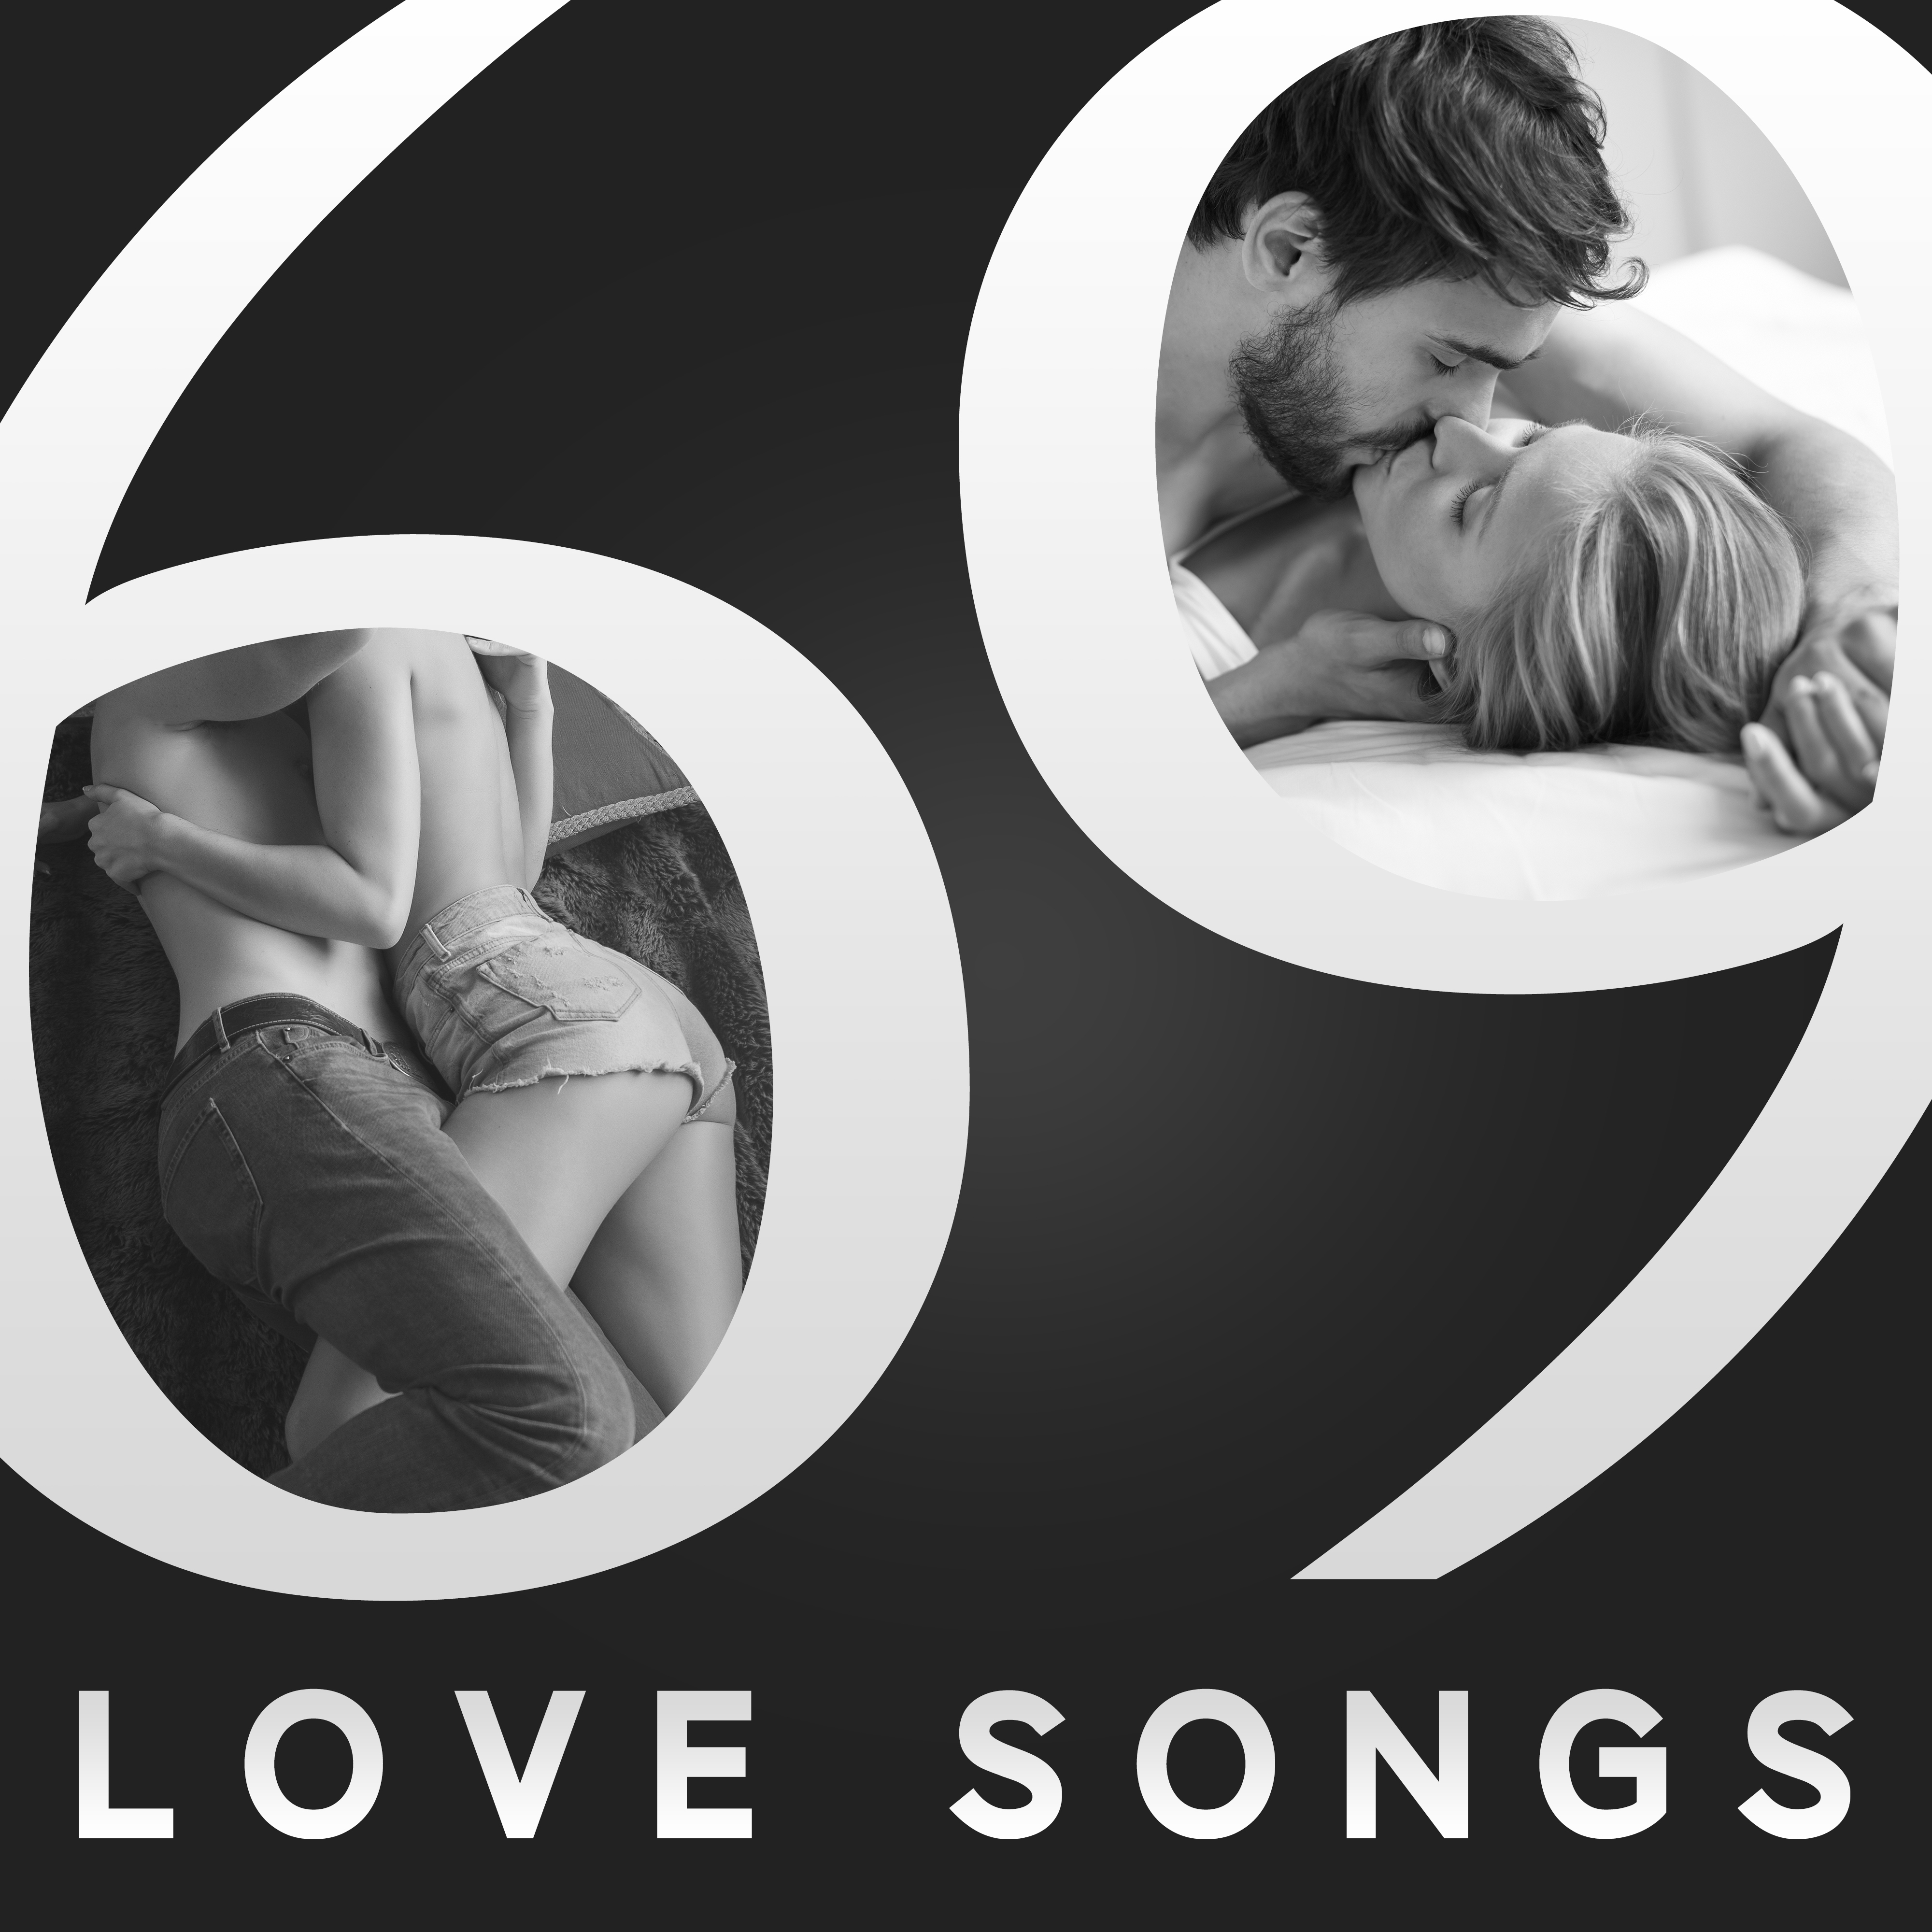 69 Love Songs – Chill Out Music, 2017, Relax, Summer Love, *** on the Beach